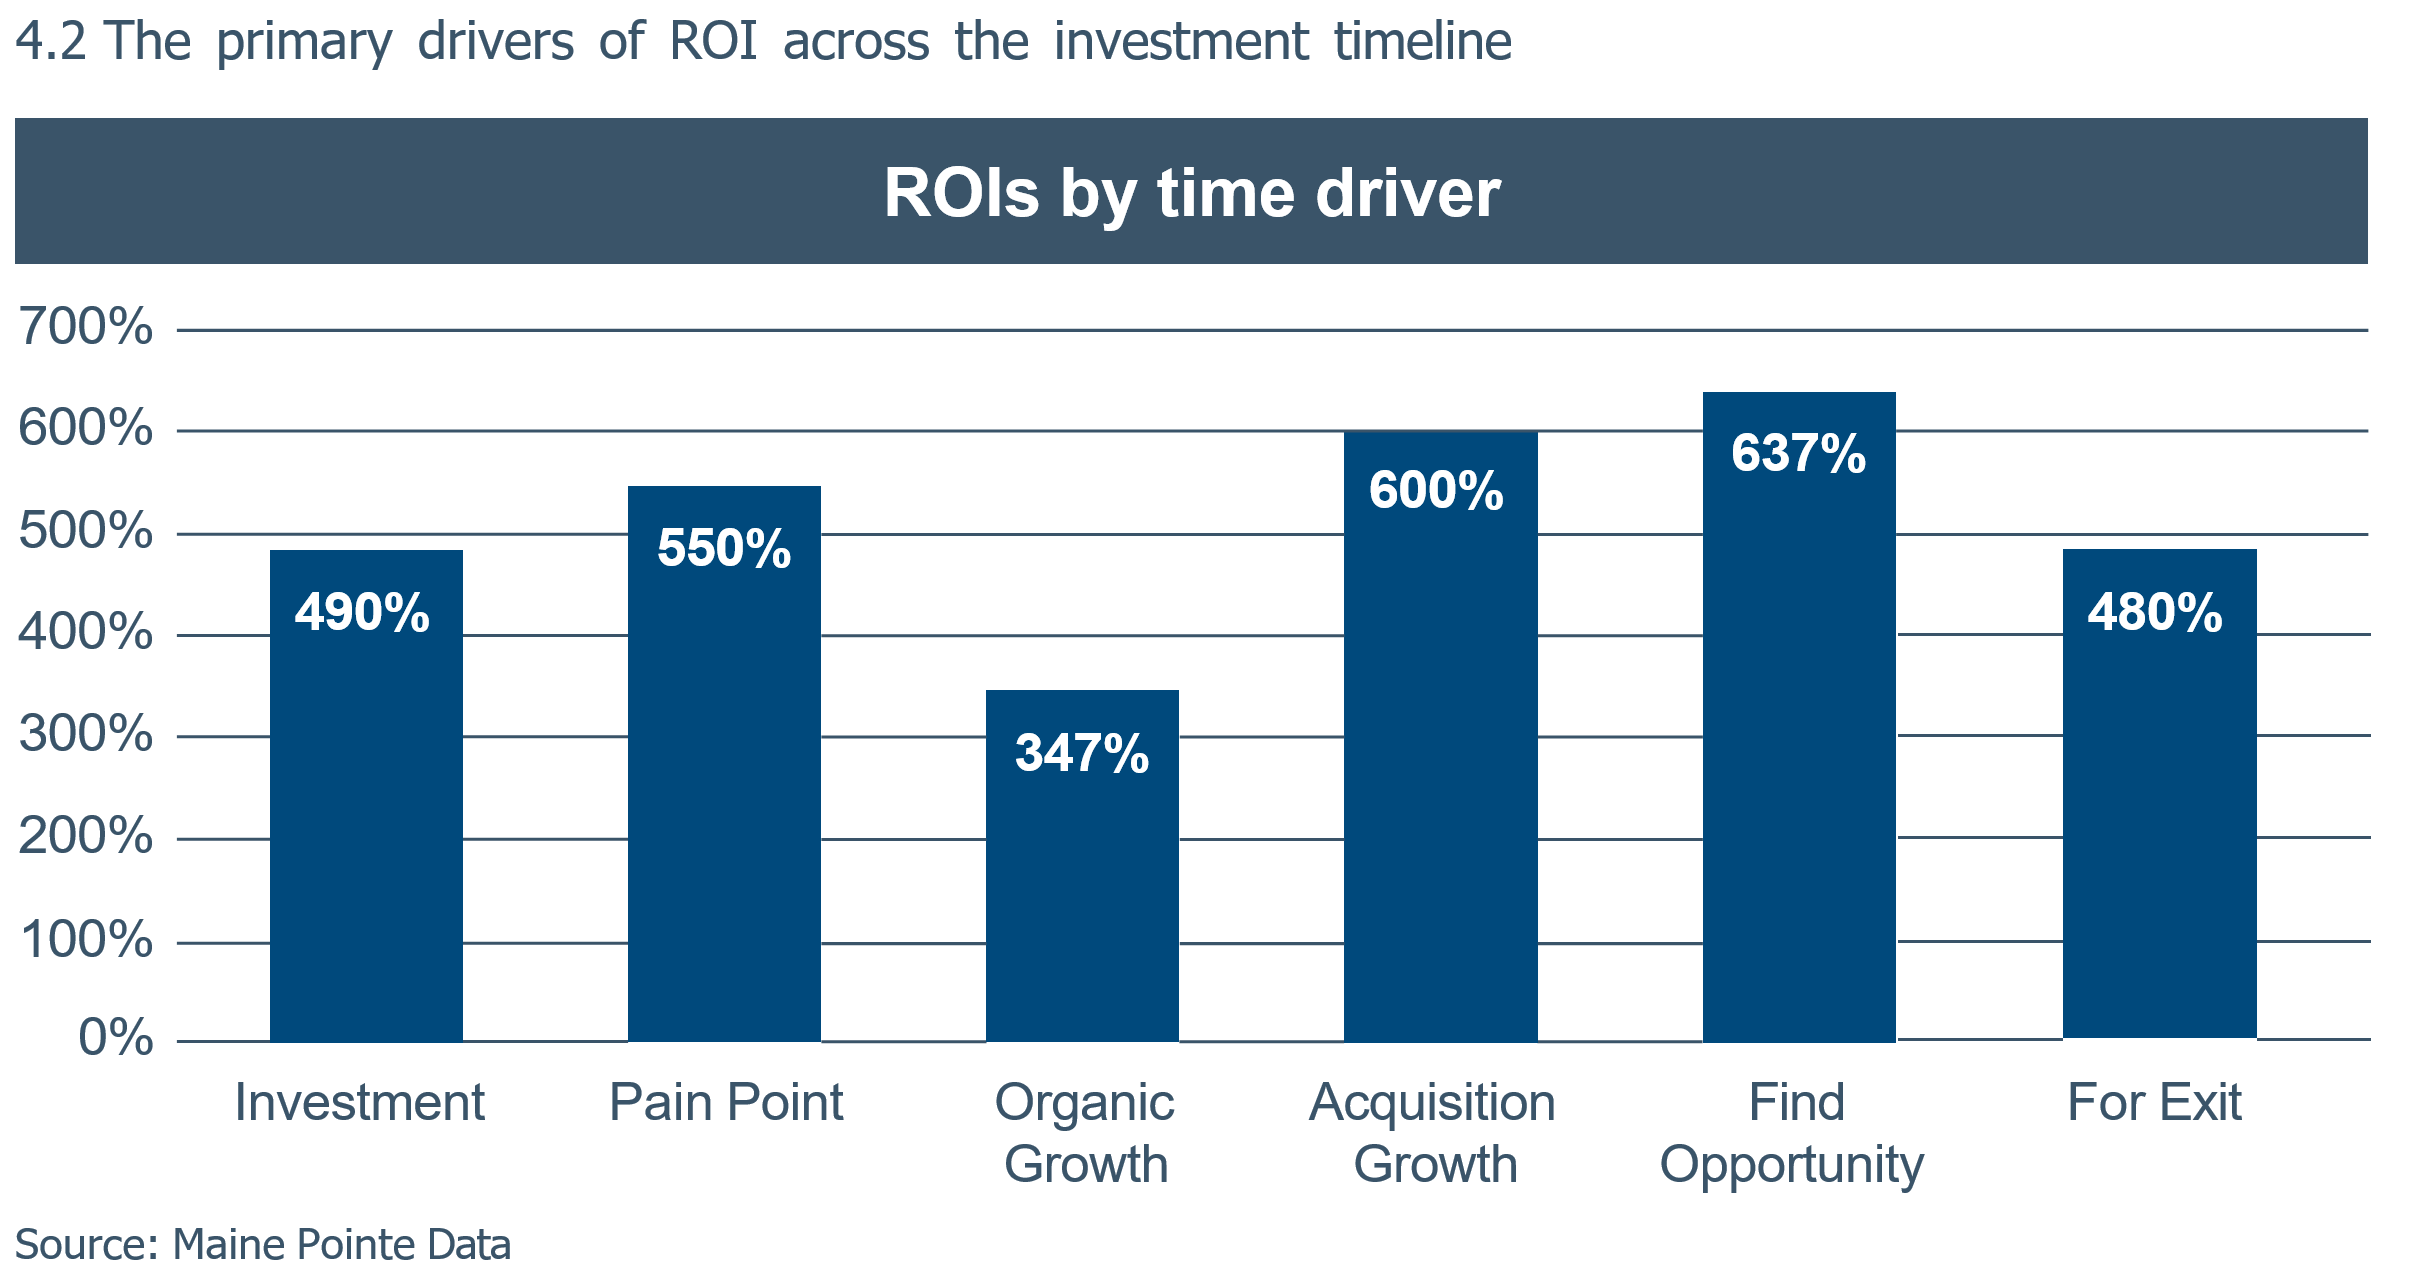 4.2	The primary drivers of ROI across the investment timeline